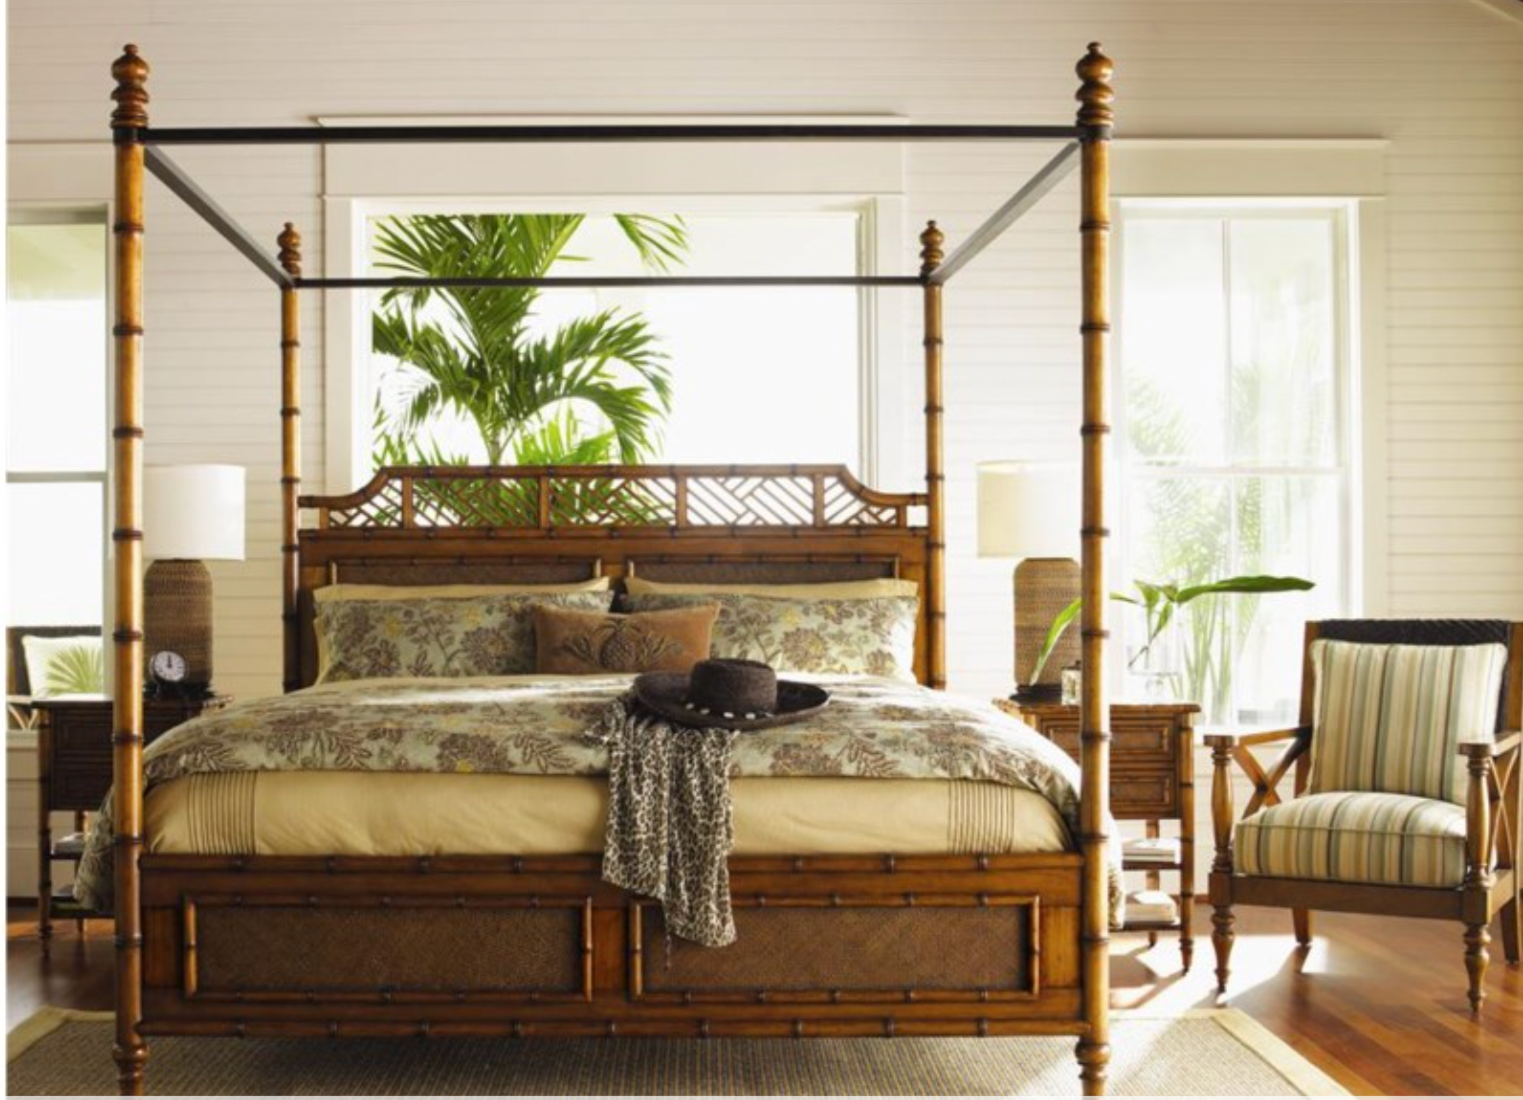 Tropical style bedroom with a canopy bed in the center. 